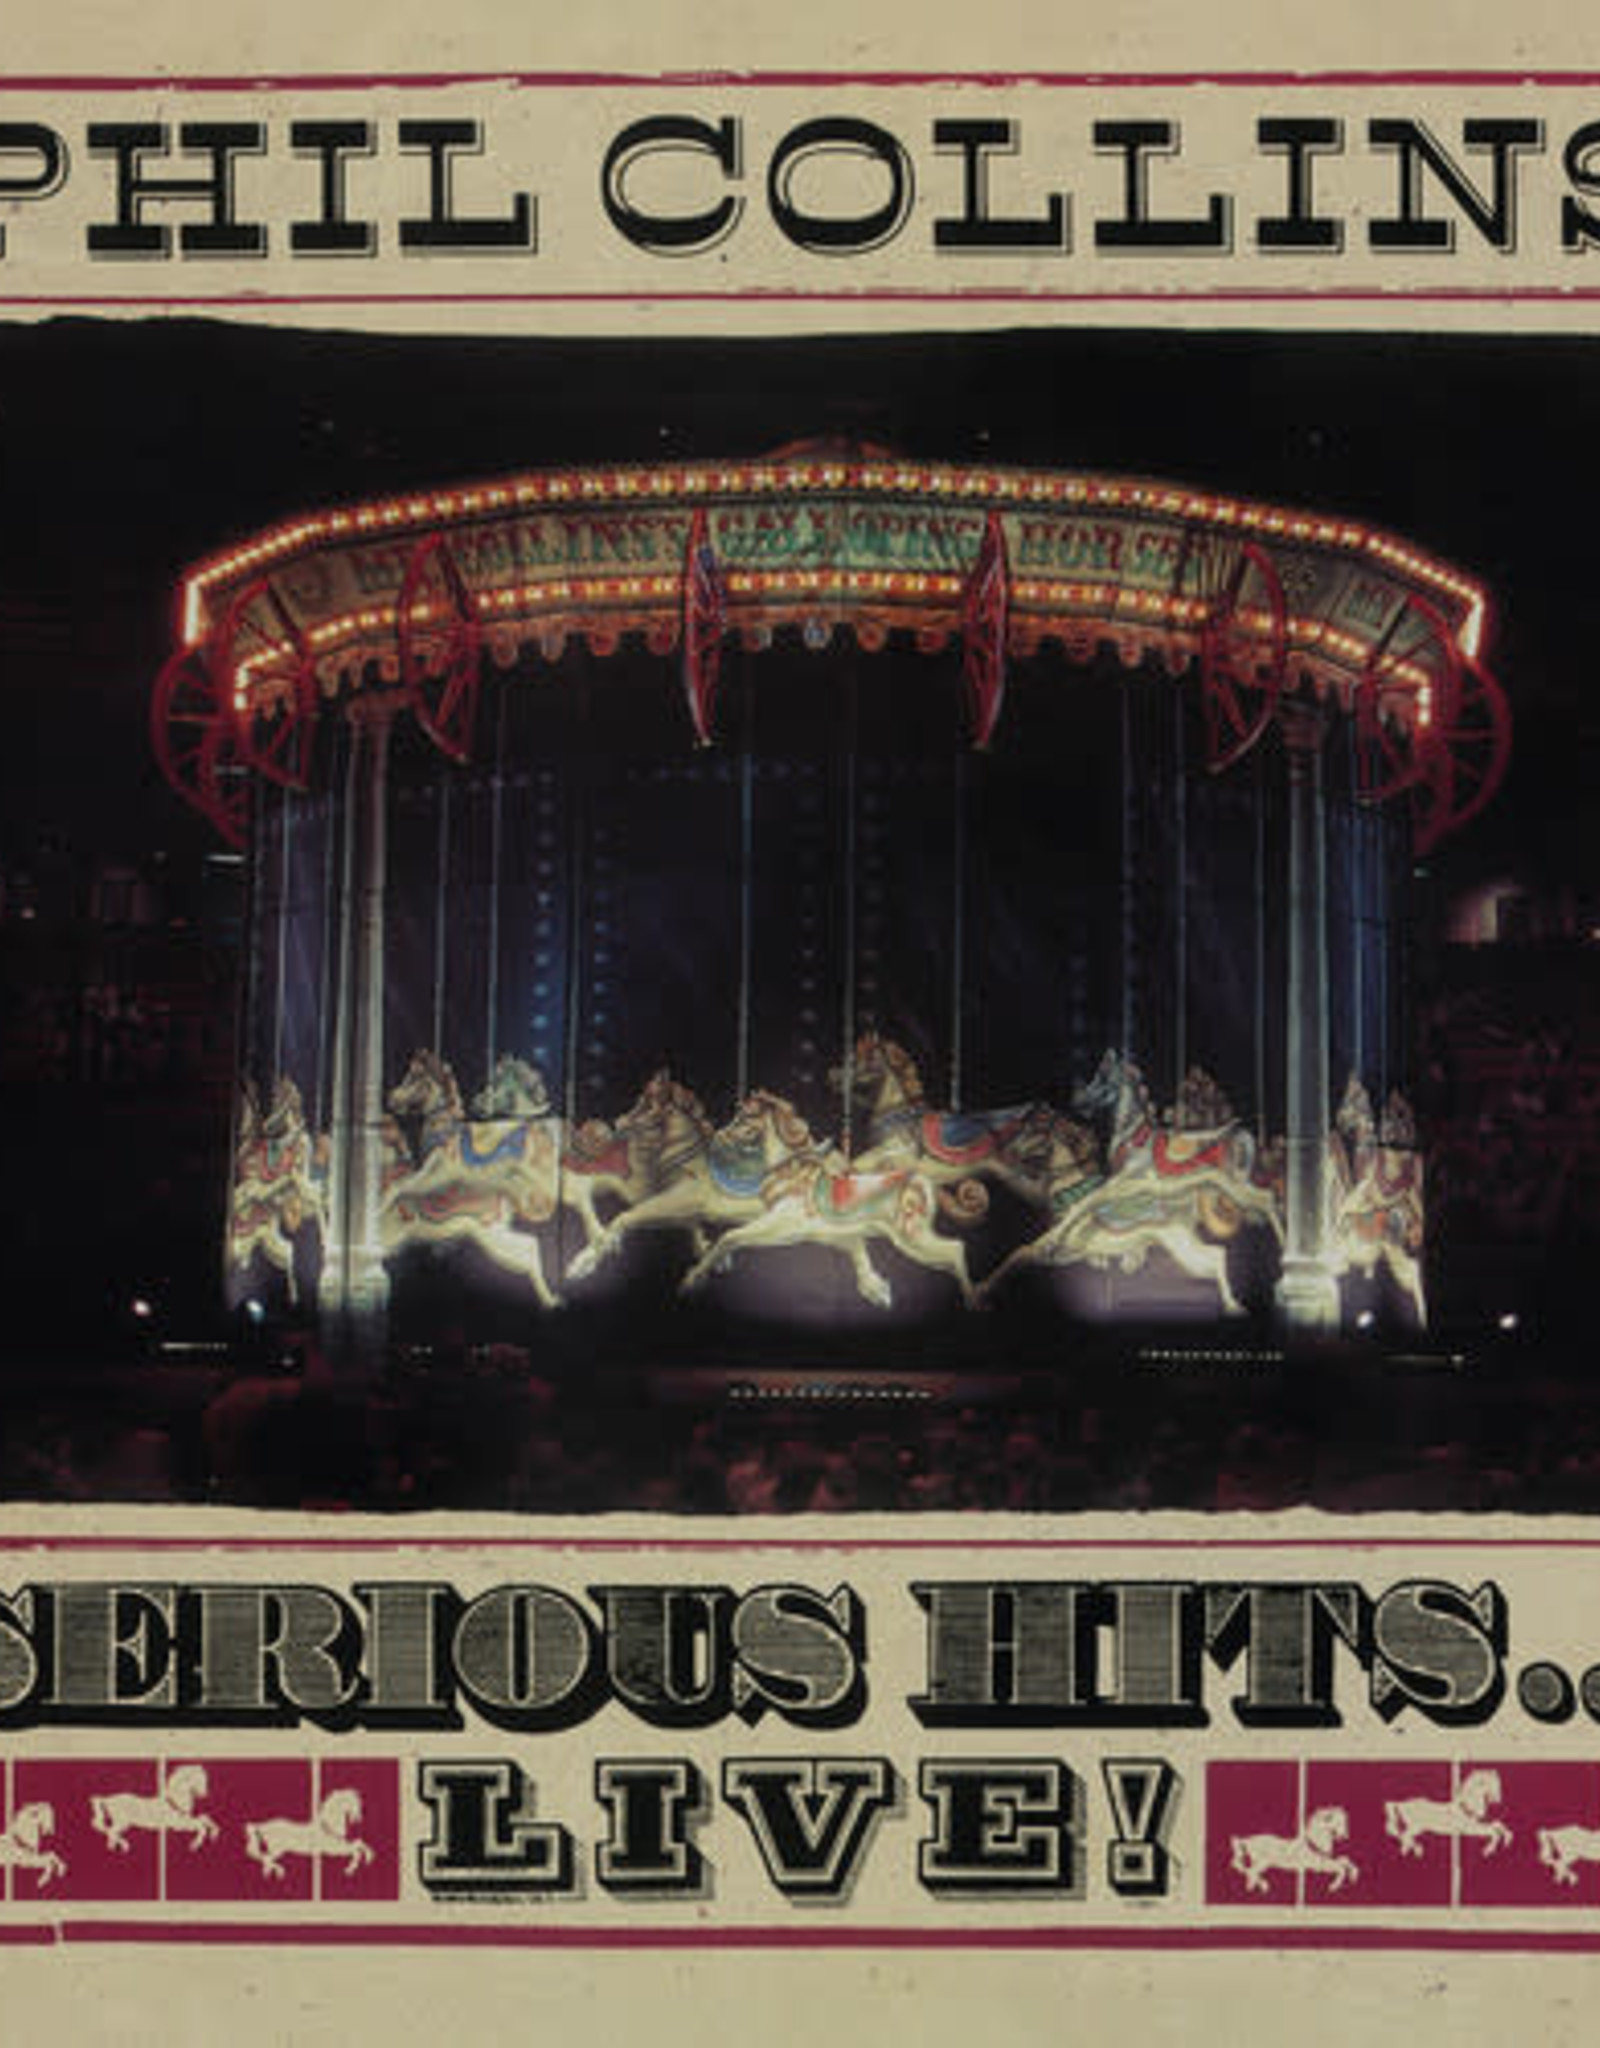 Phil Collins -Serious Hits...Live!